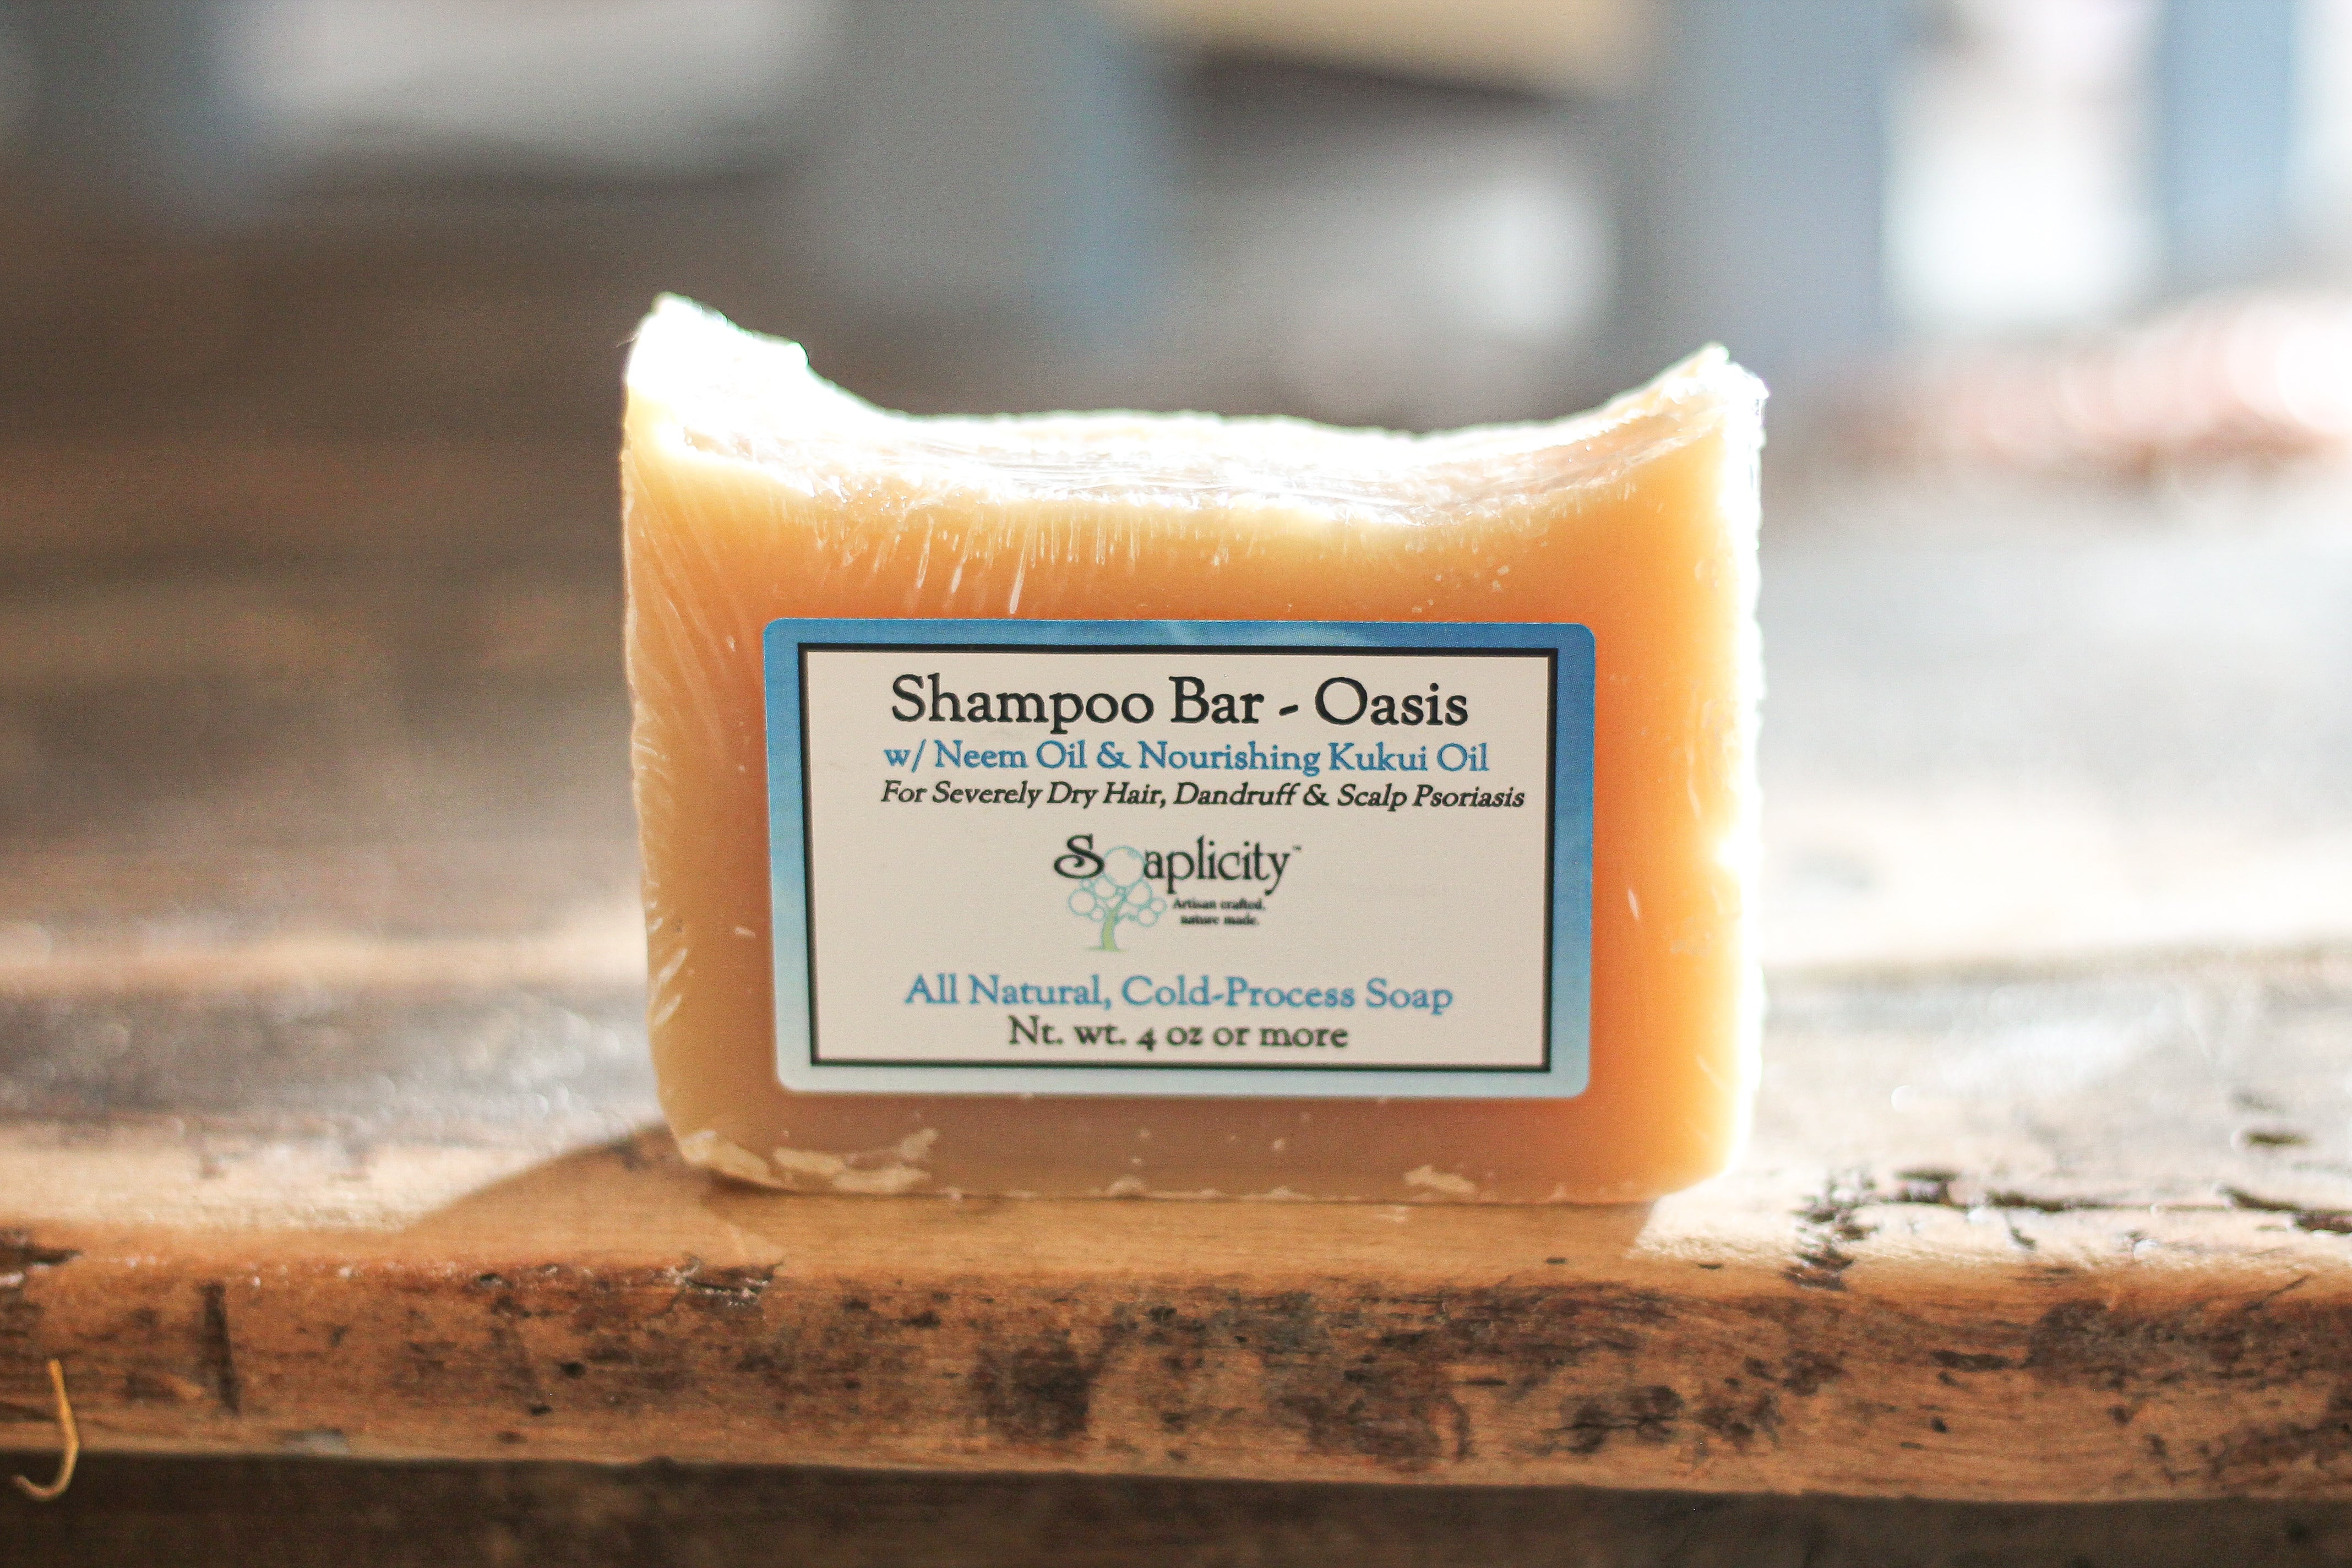 Oasis - Shampoo Bar for Severely Dry Scalp – Soaplicity